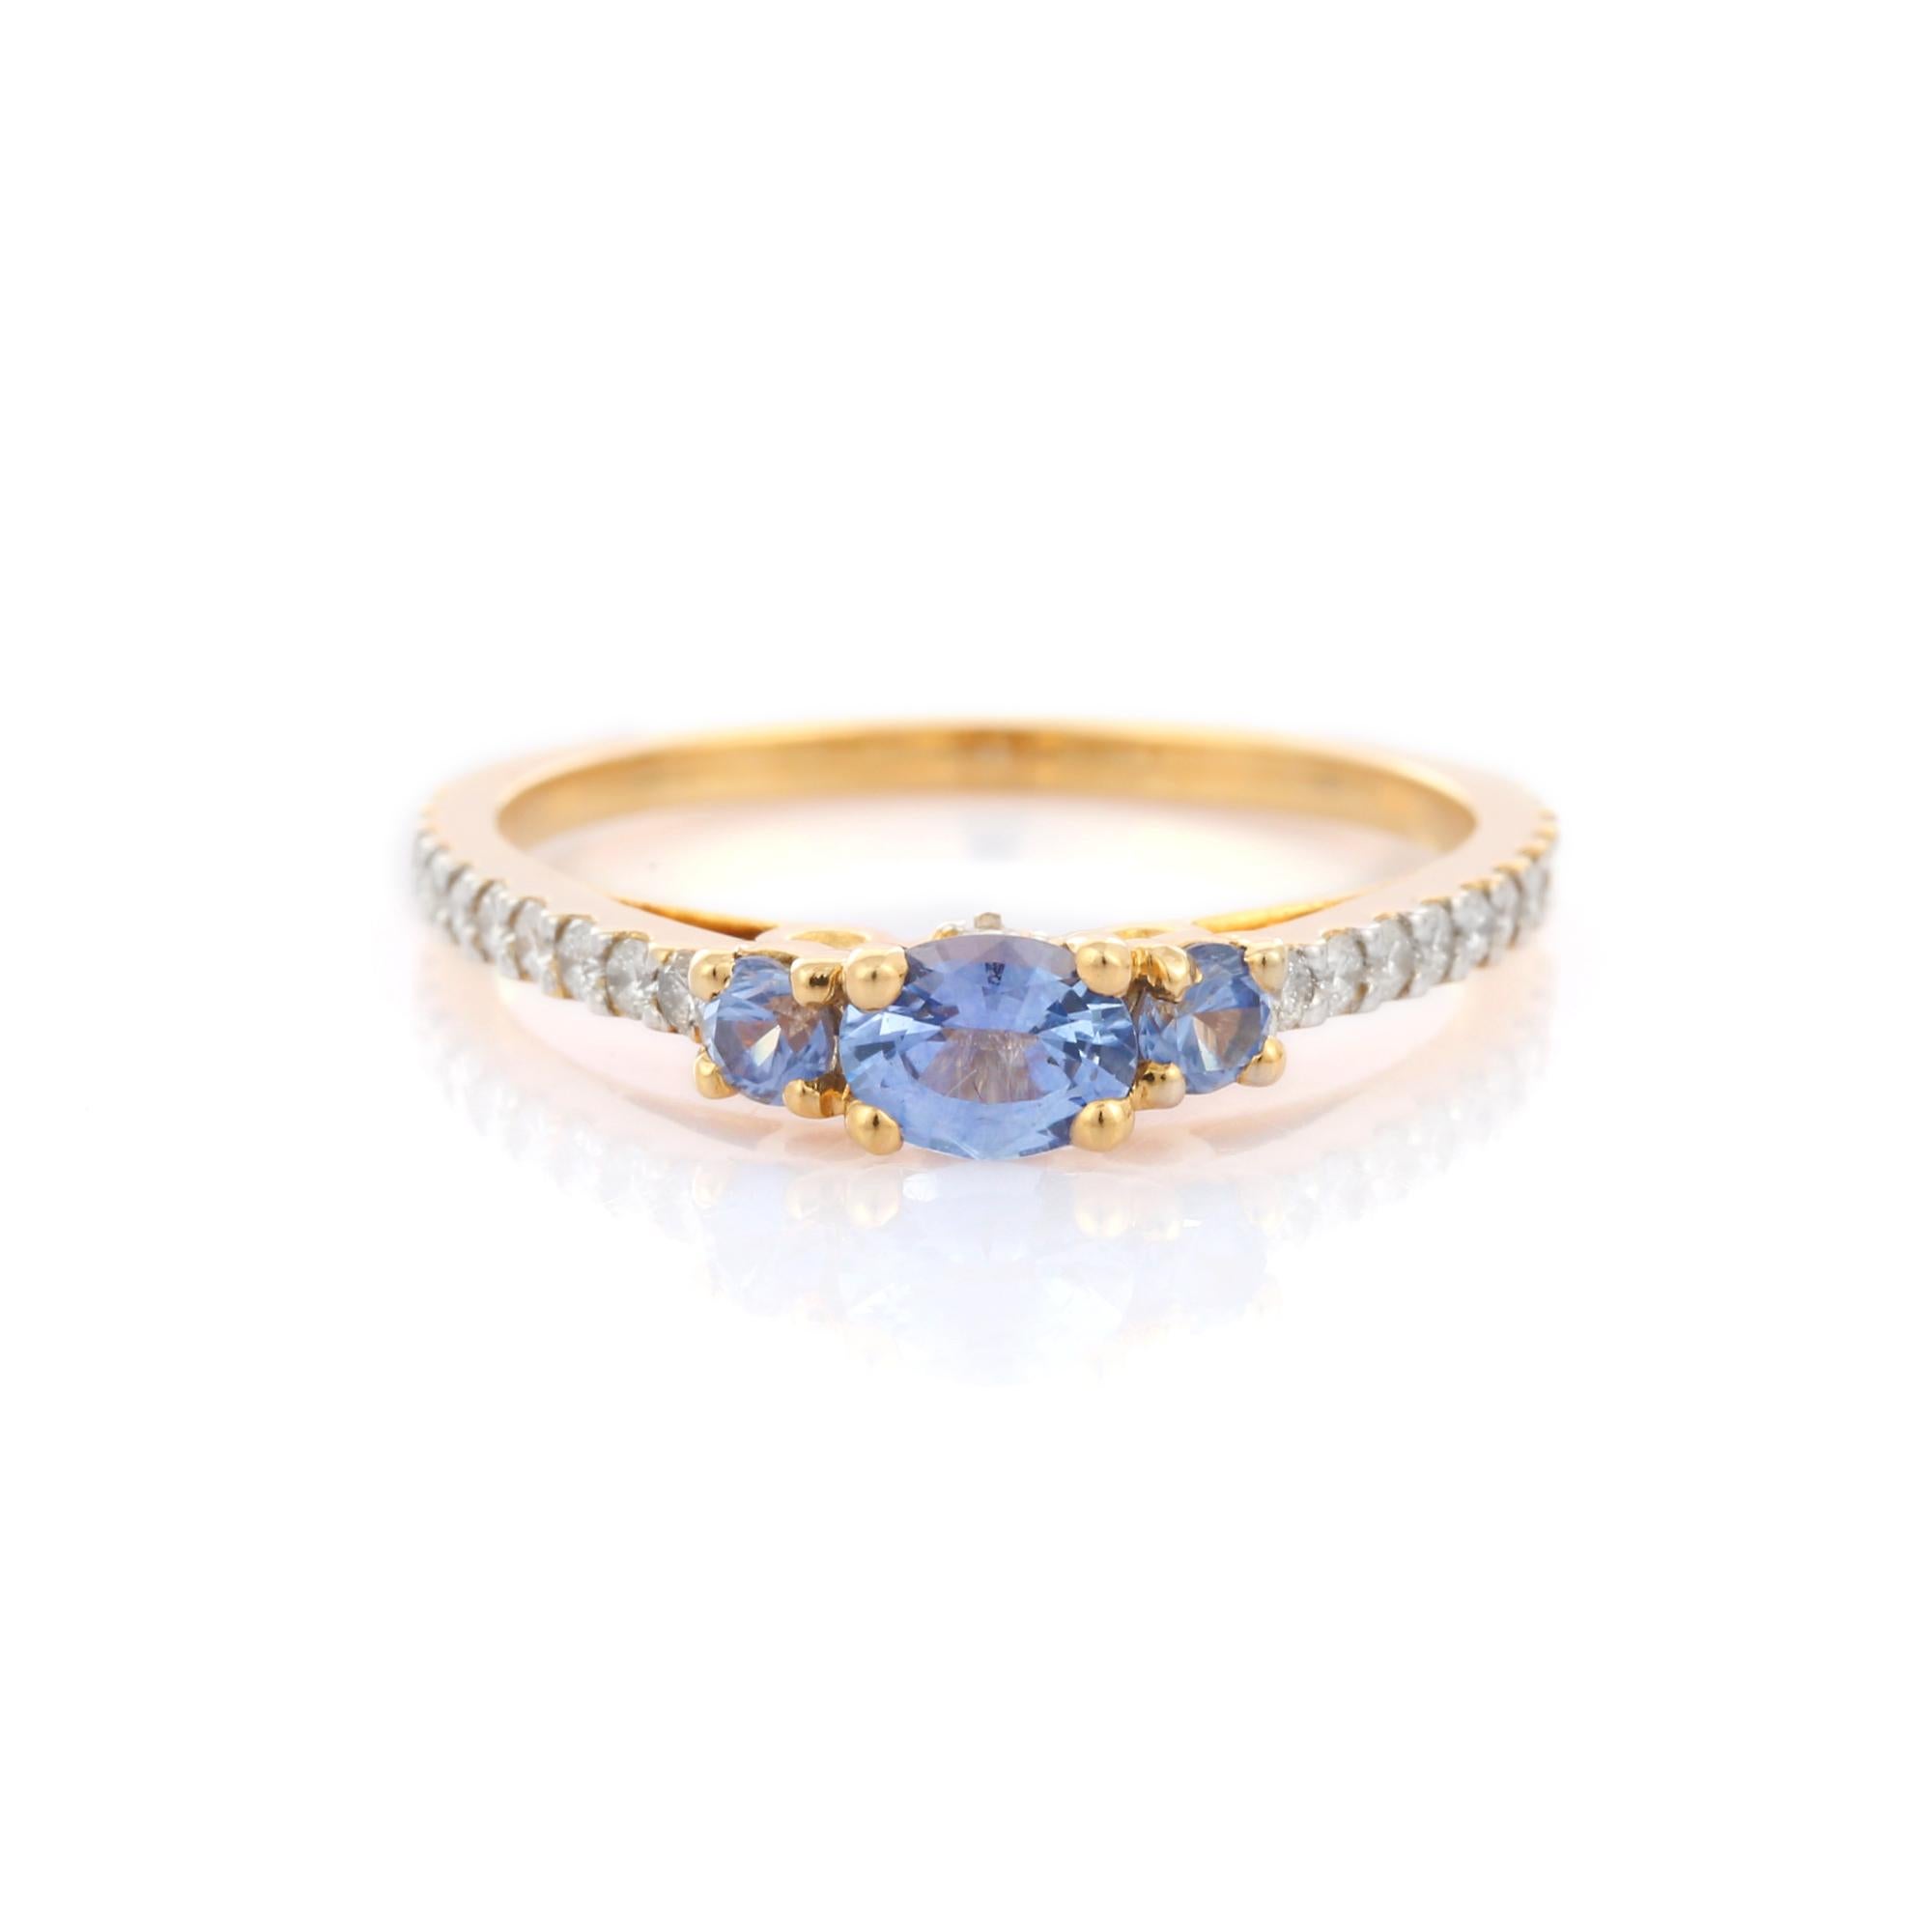 For Sale:  Minimalist Three Stone Blue Sapphire and Diamond Ring in 14K Solid Yellow Gold 9